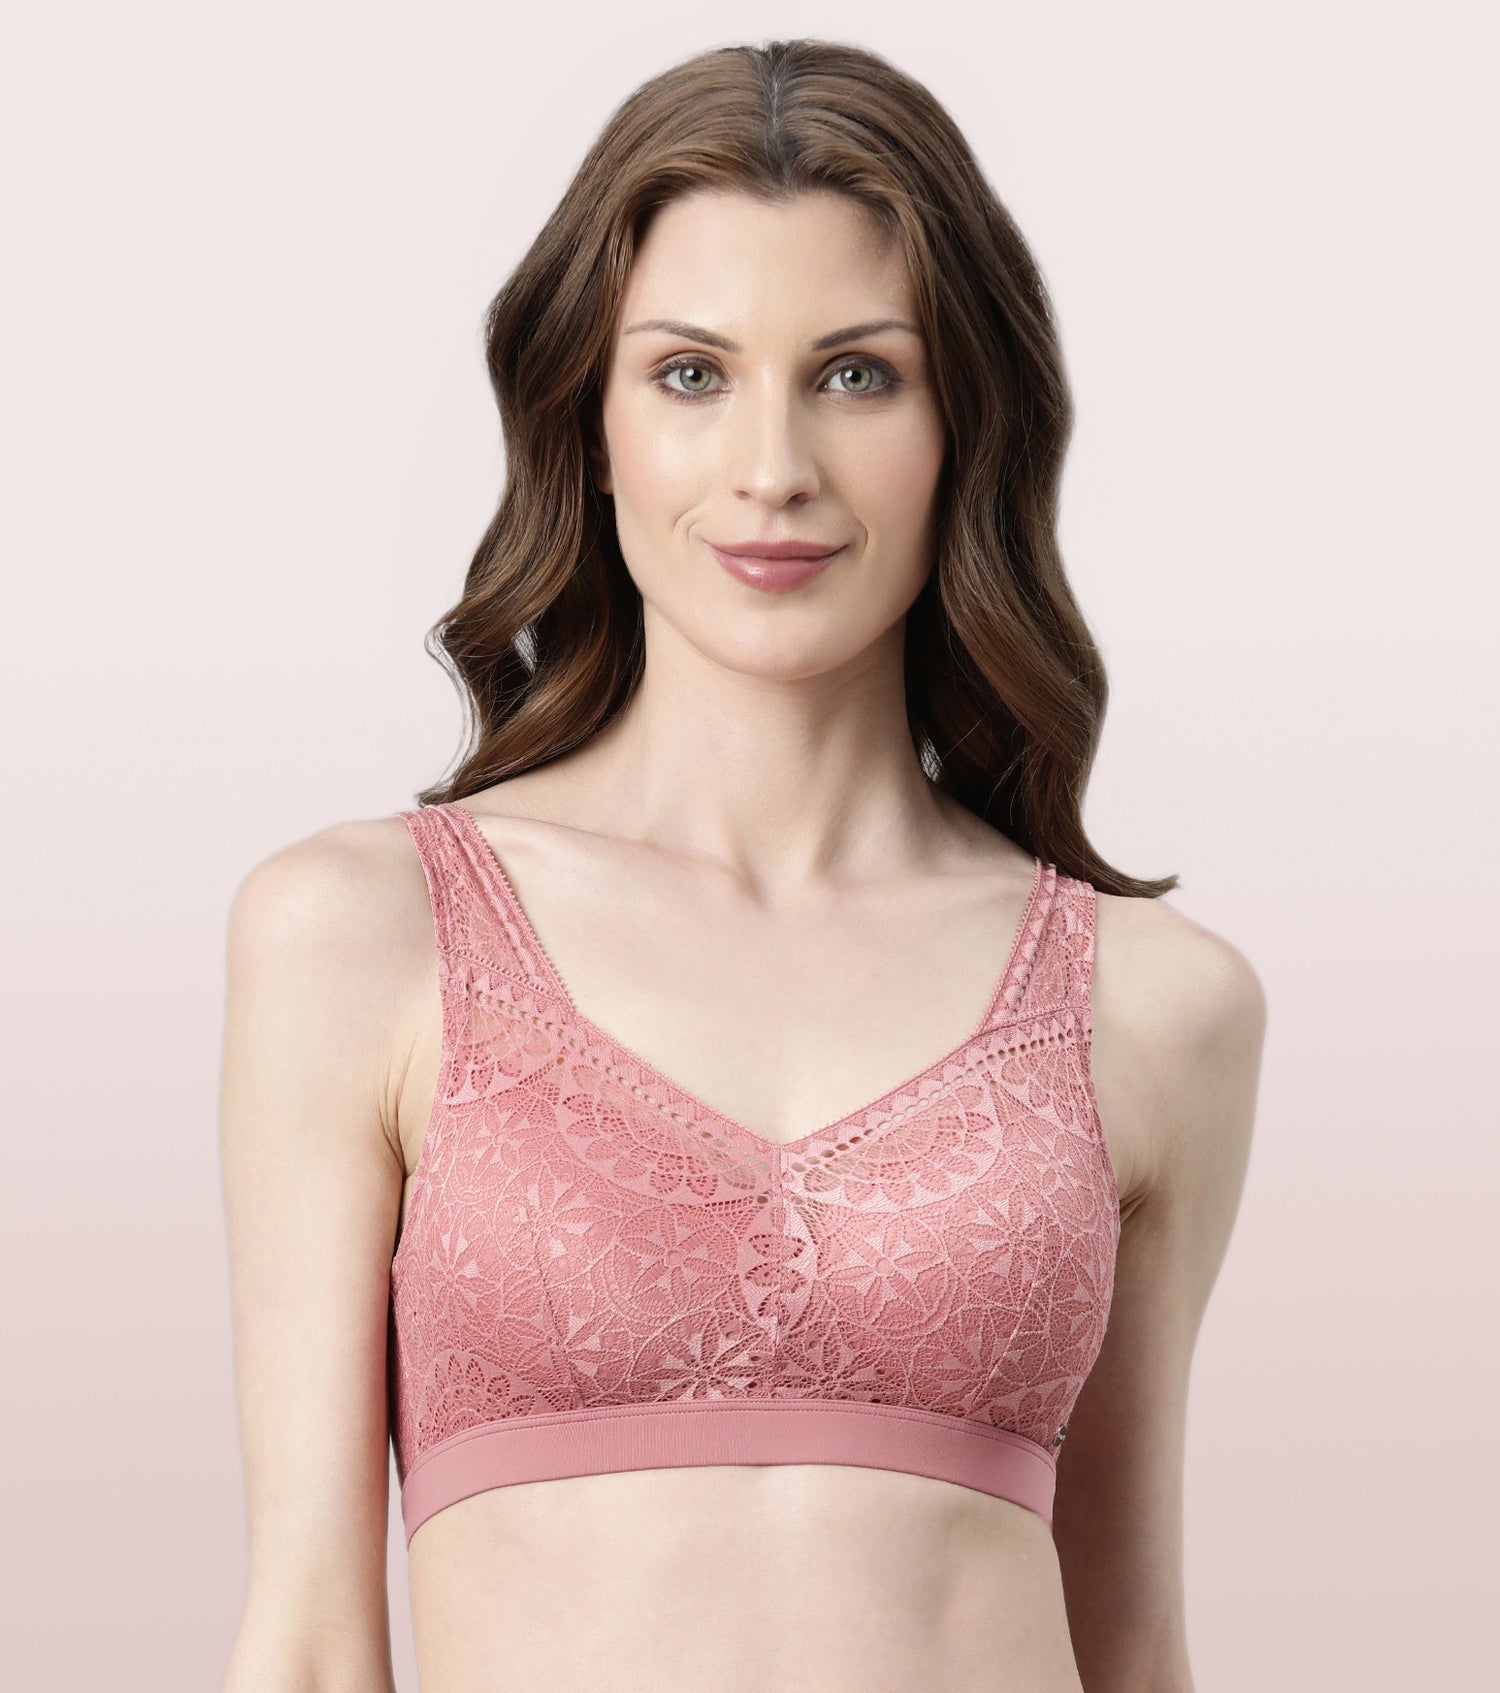 The Best Bra Brands, According To 33 Real Women